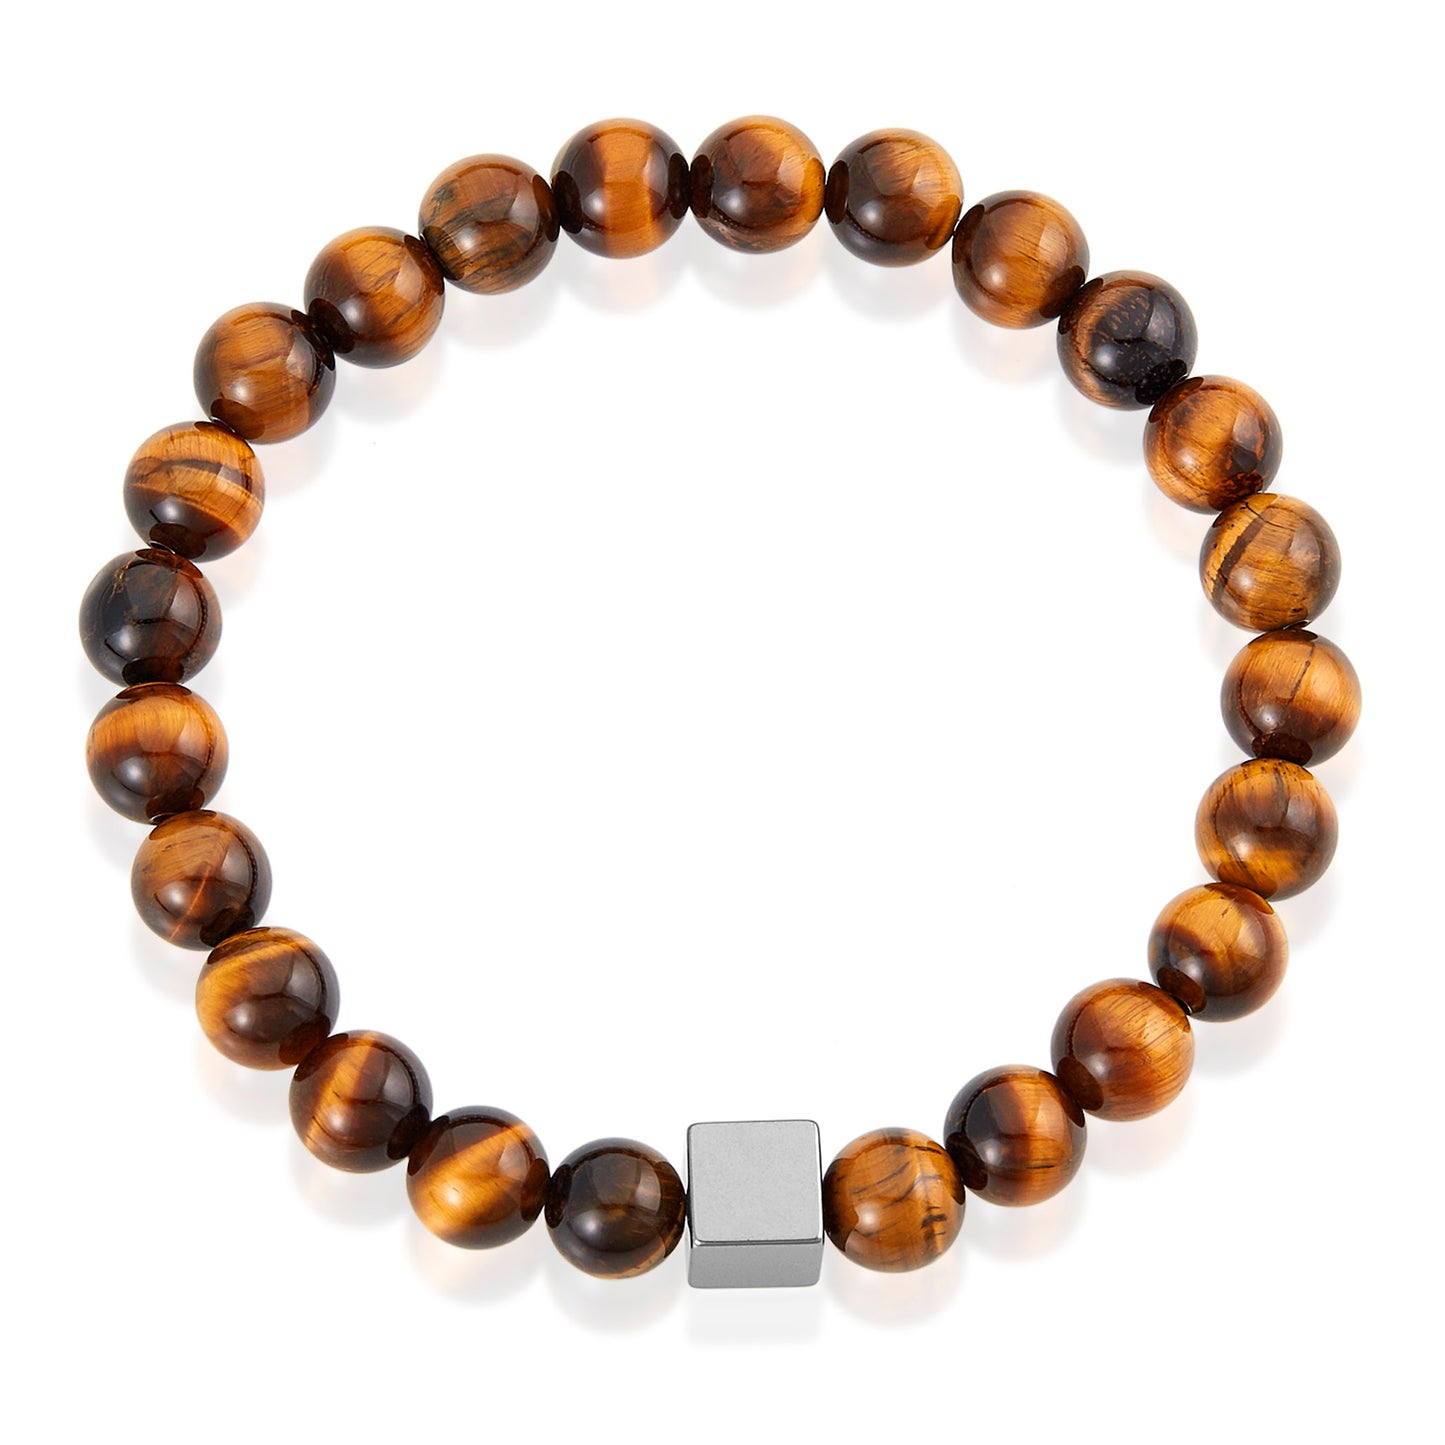 Unisex 20 Piece Natural Stone and Hematite Cube Stretch Bracelet Pack